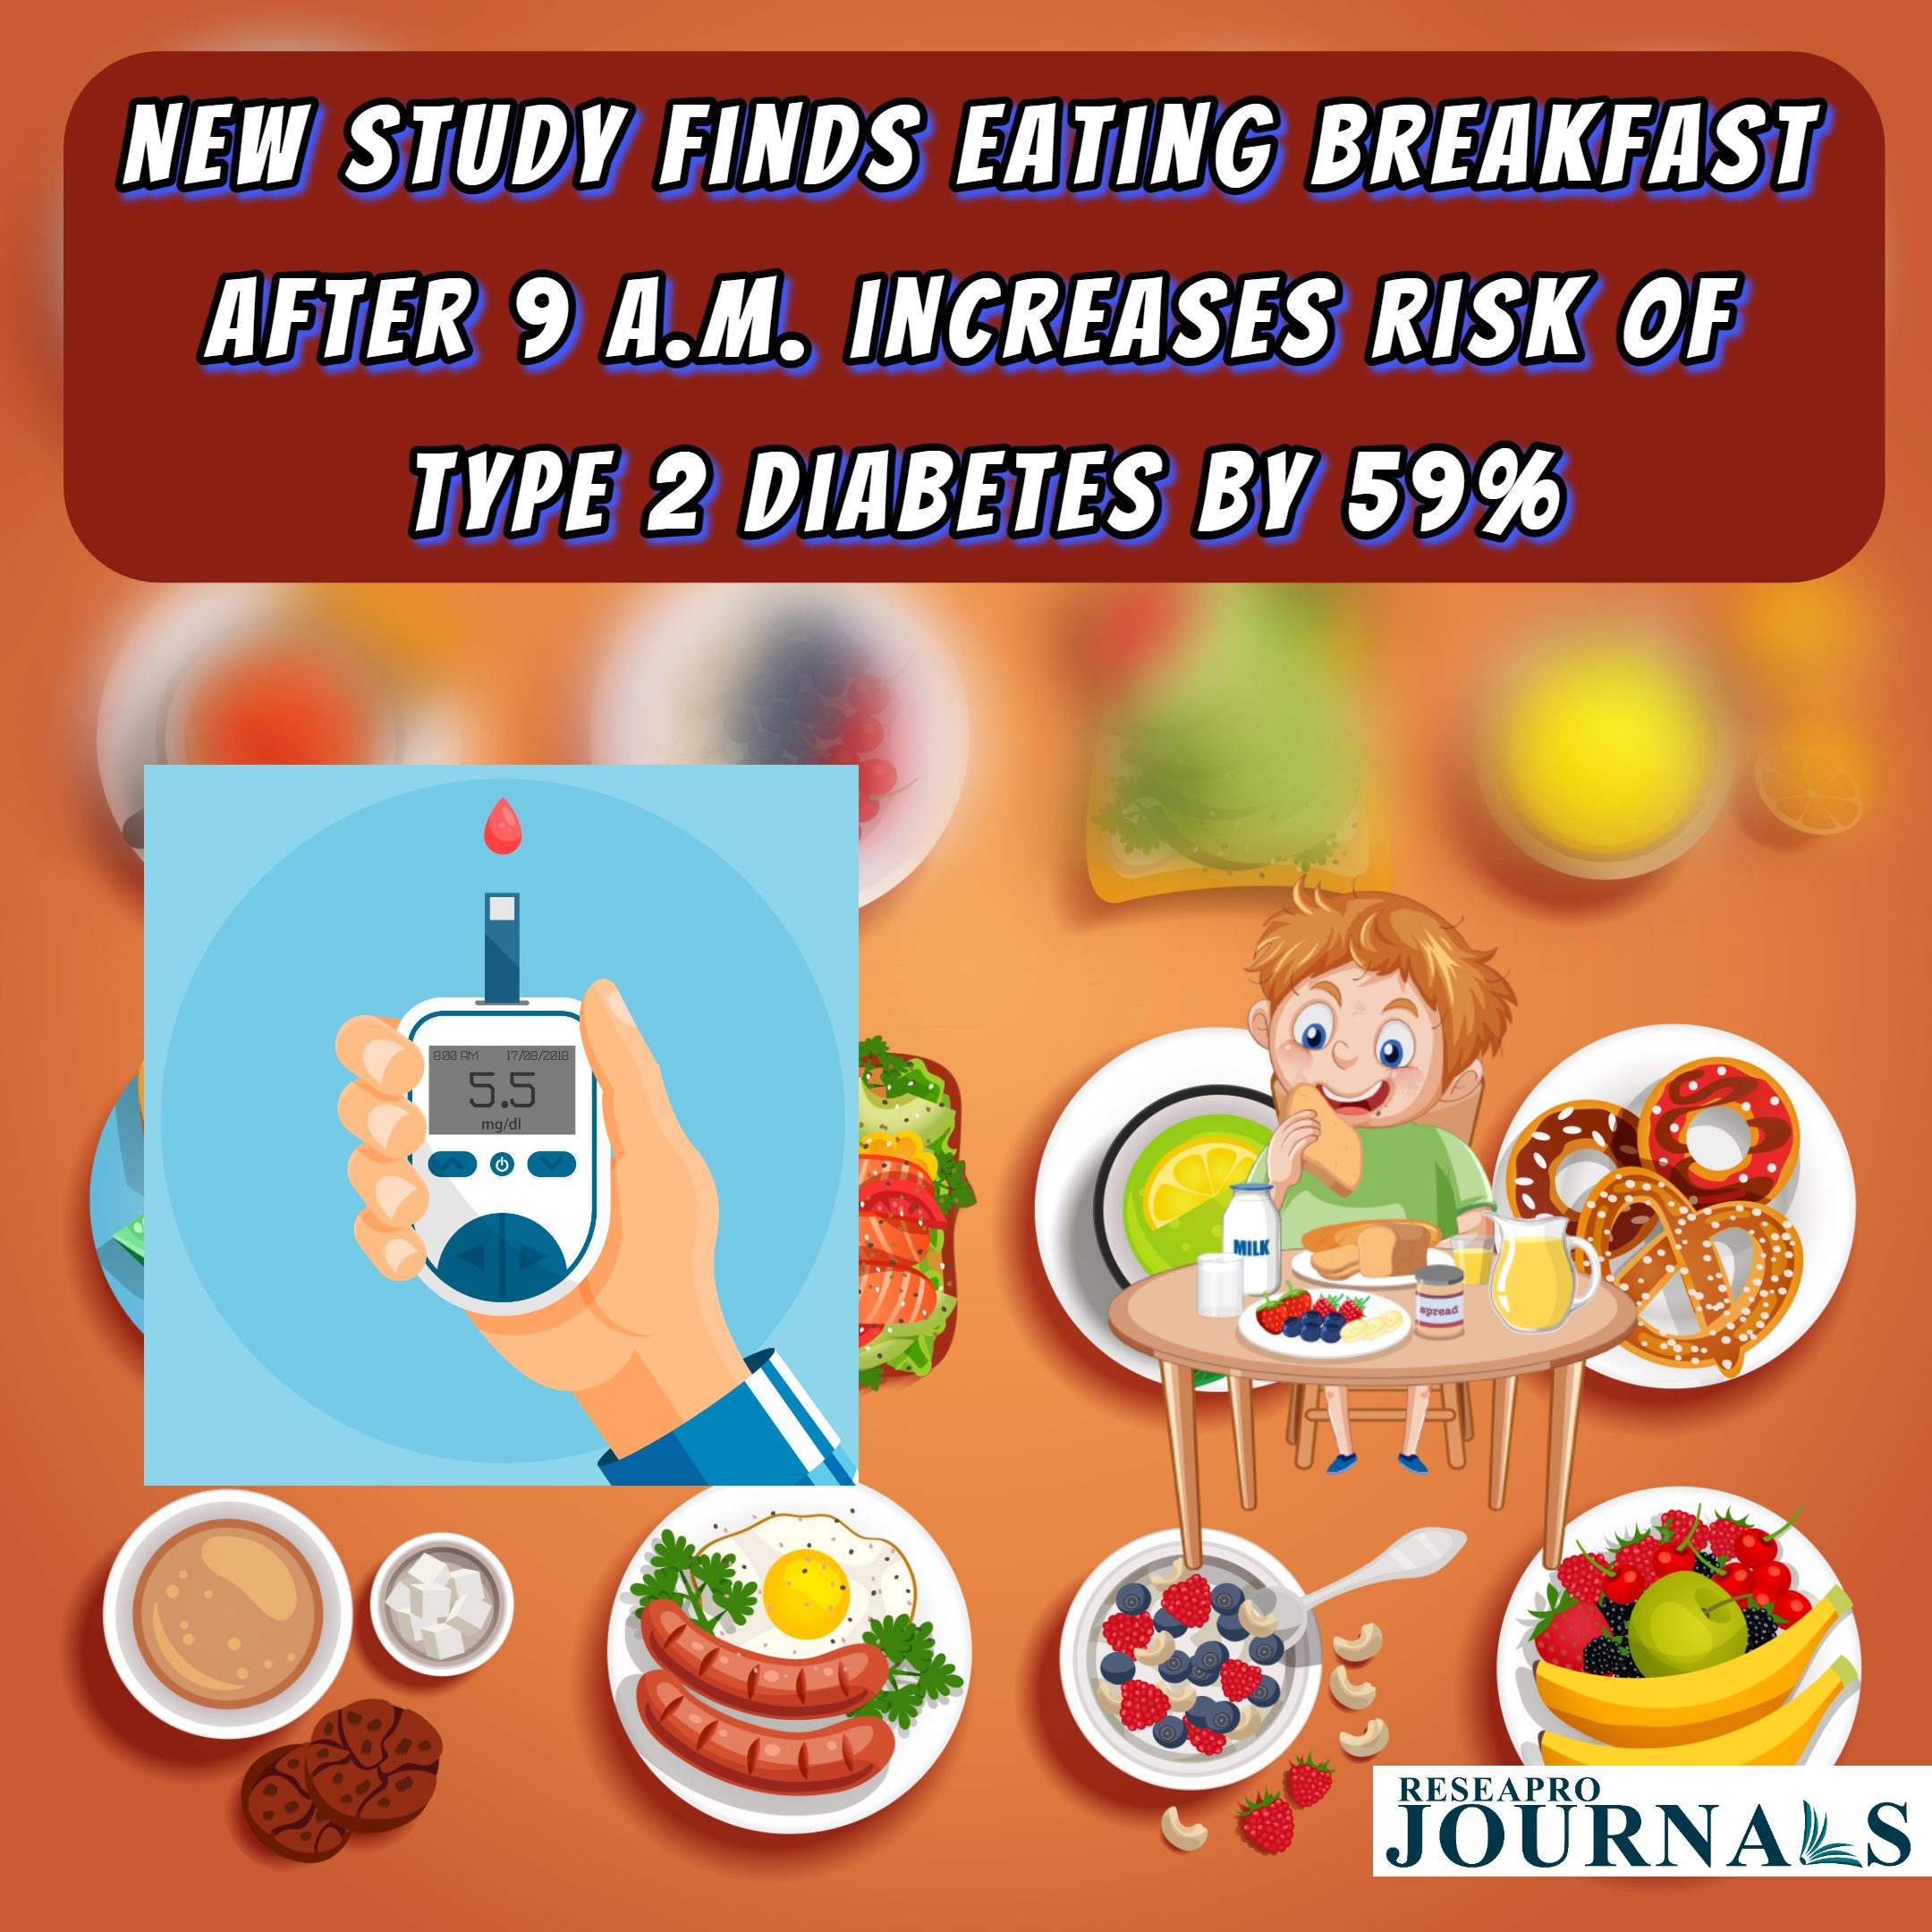 New study finds eating breakfast after 9 a.m. increases risk of type 2 diabetes by 59%